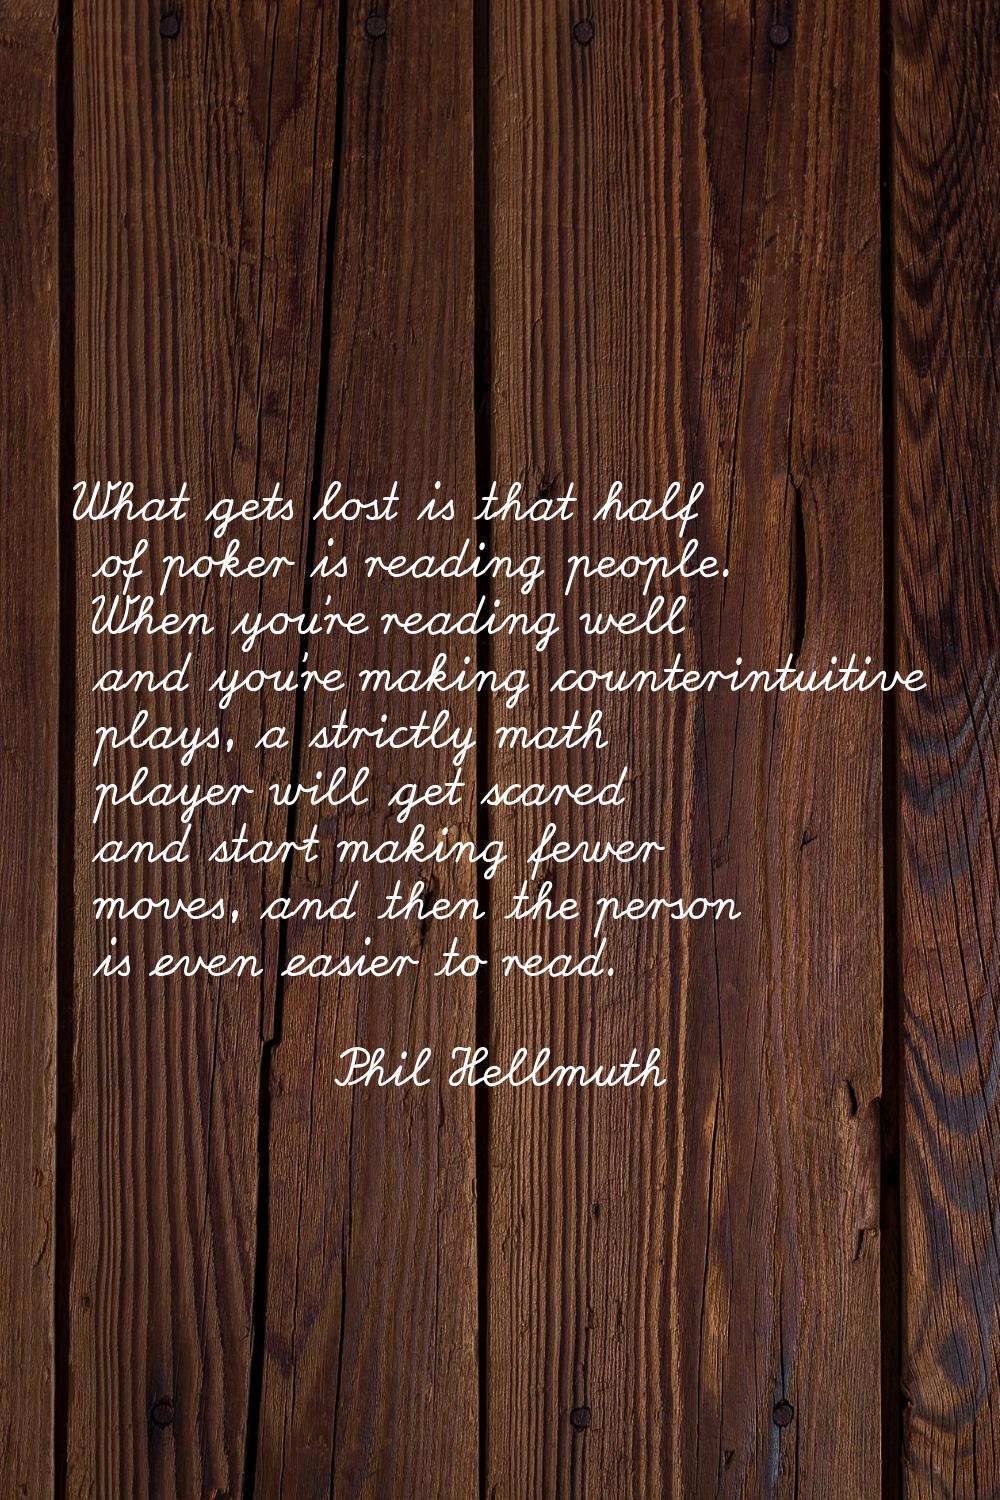 What gets lost is that half of poker is reading people. When you're reading well and you're making 